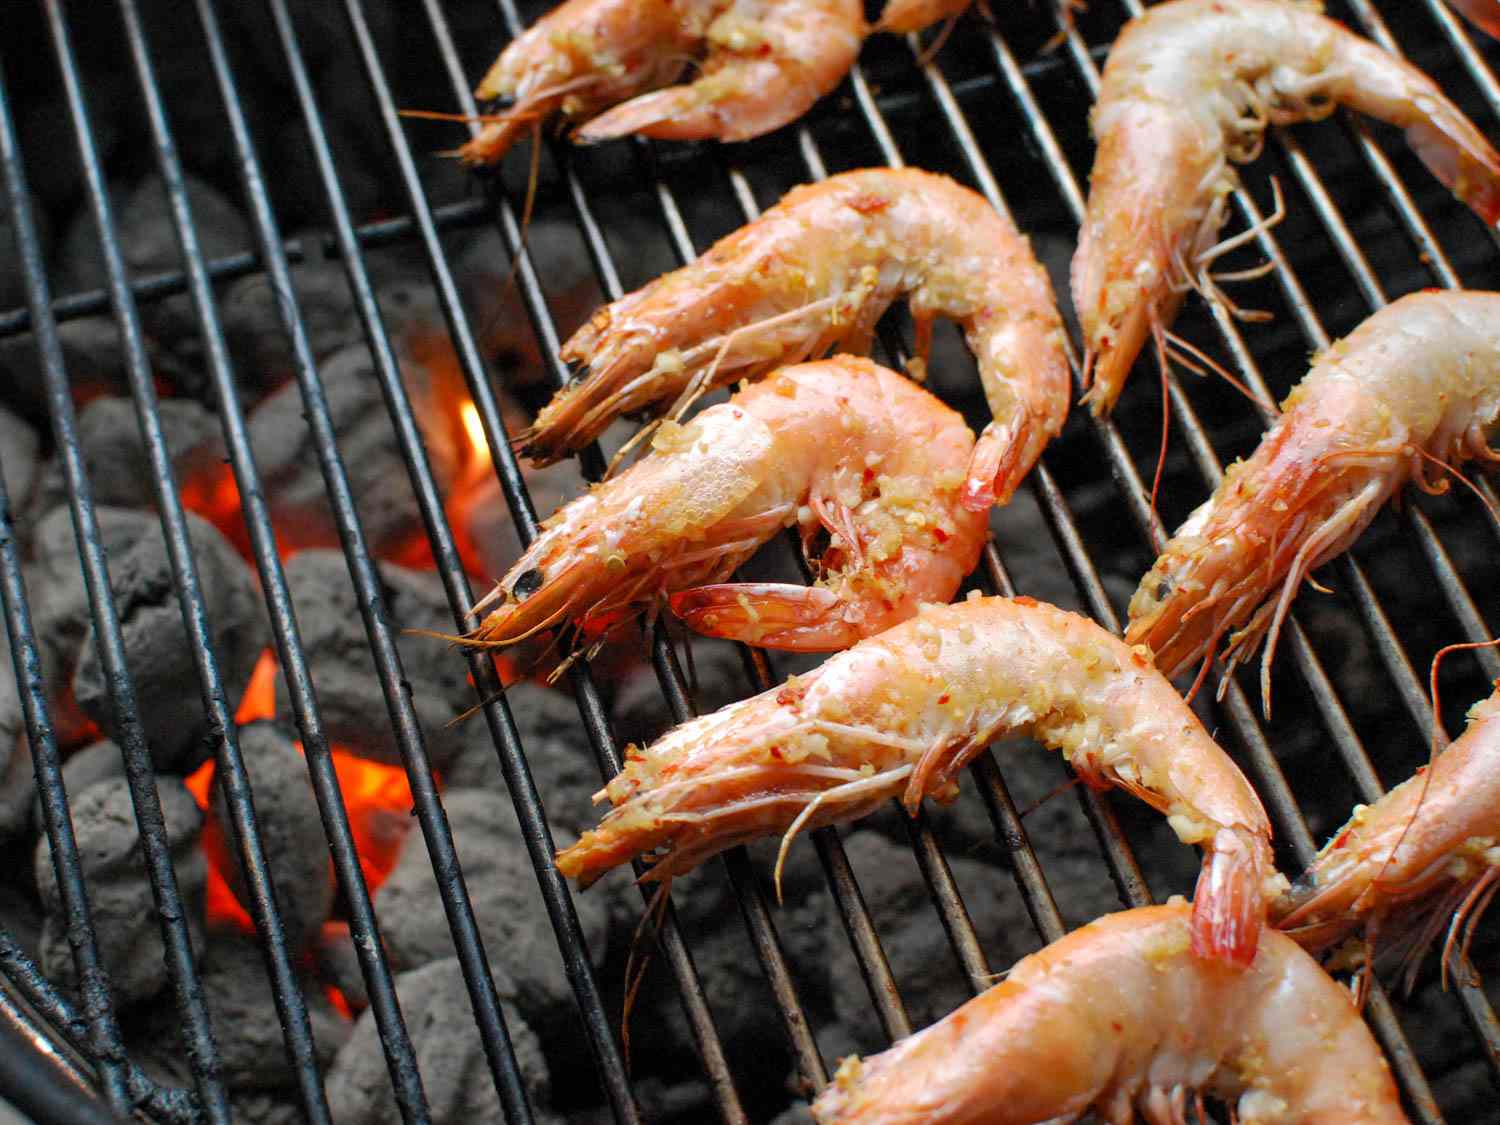 How To Grill Shrimp With Shell On Grill - Recipes.net